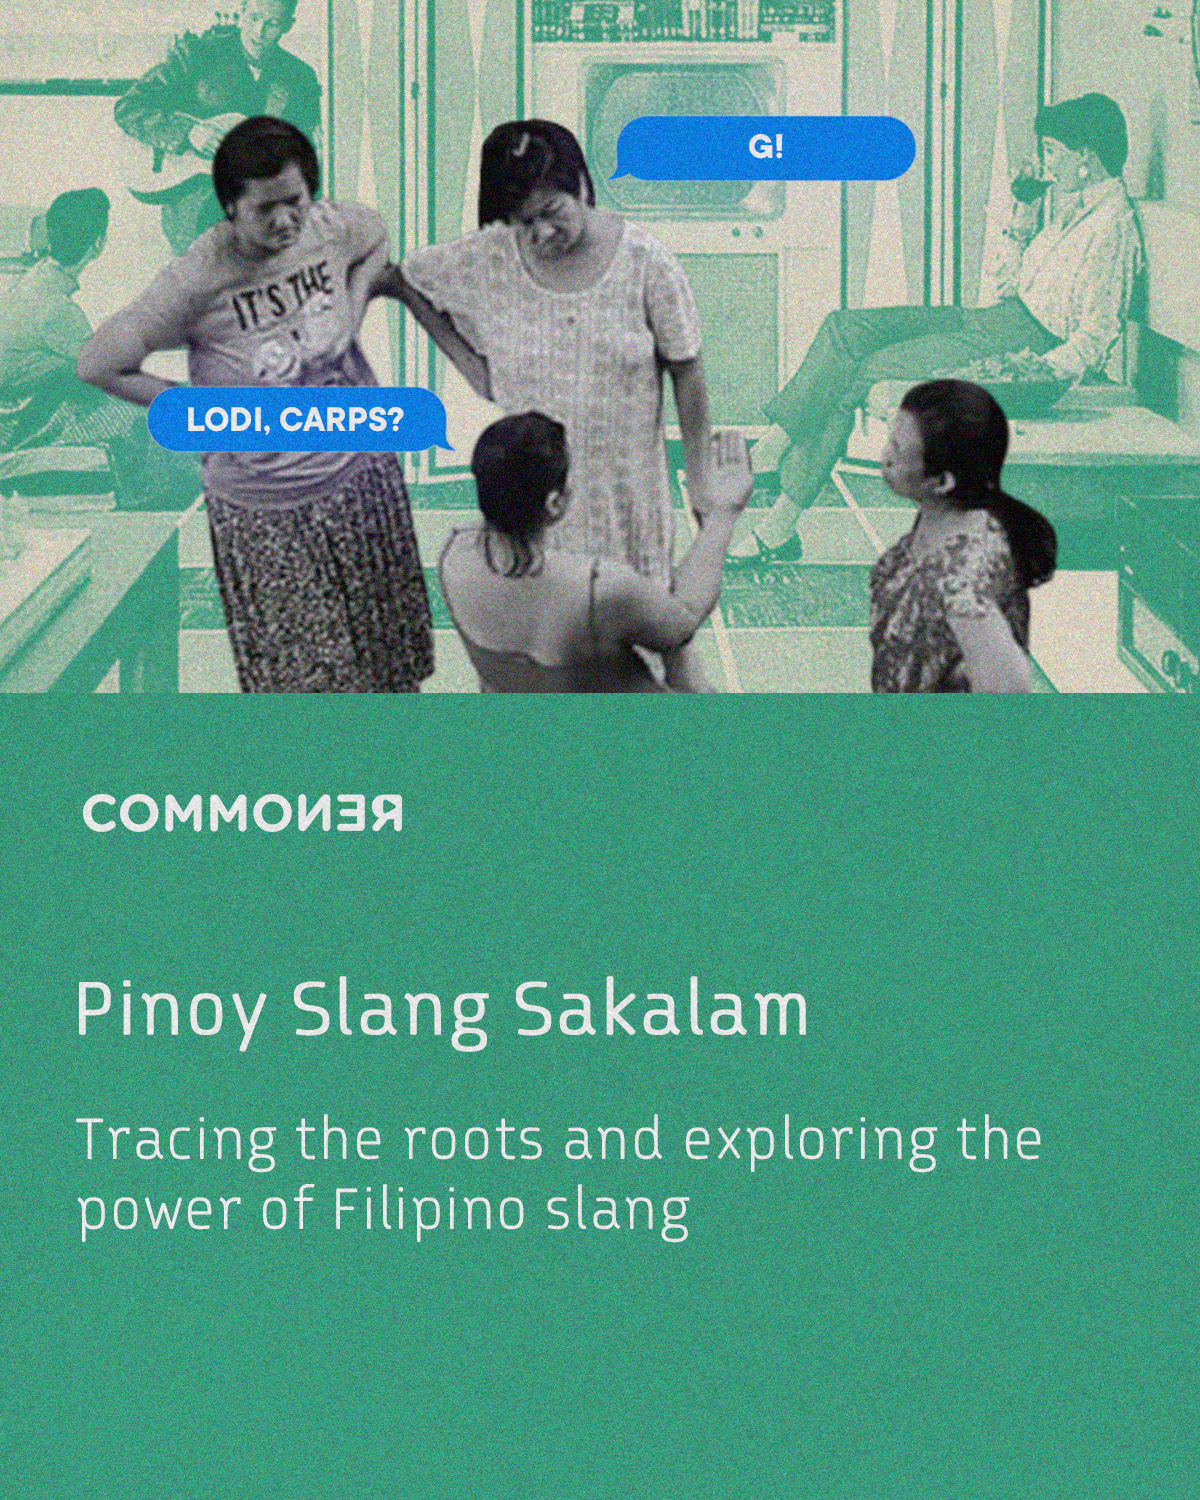 Internet Slang Words in Filipino That Pinoy Millennials Use -   Blog